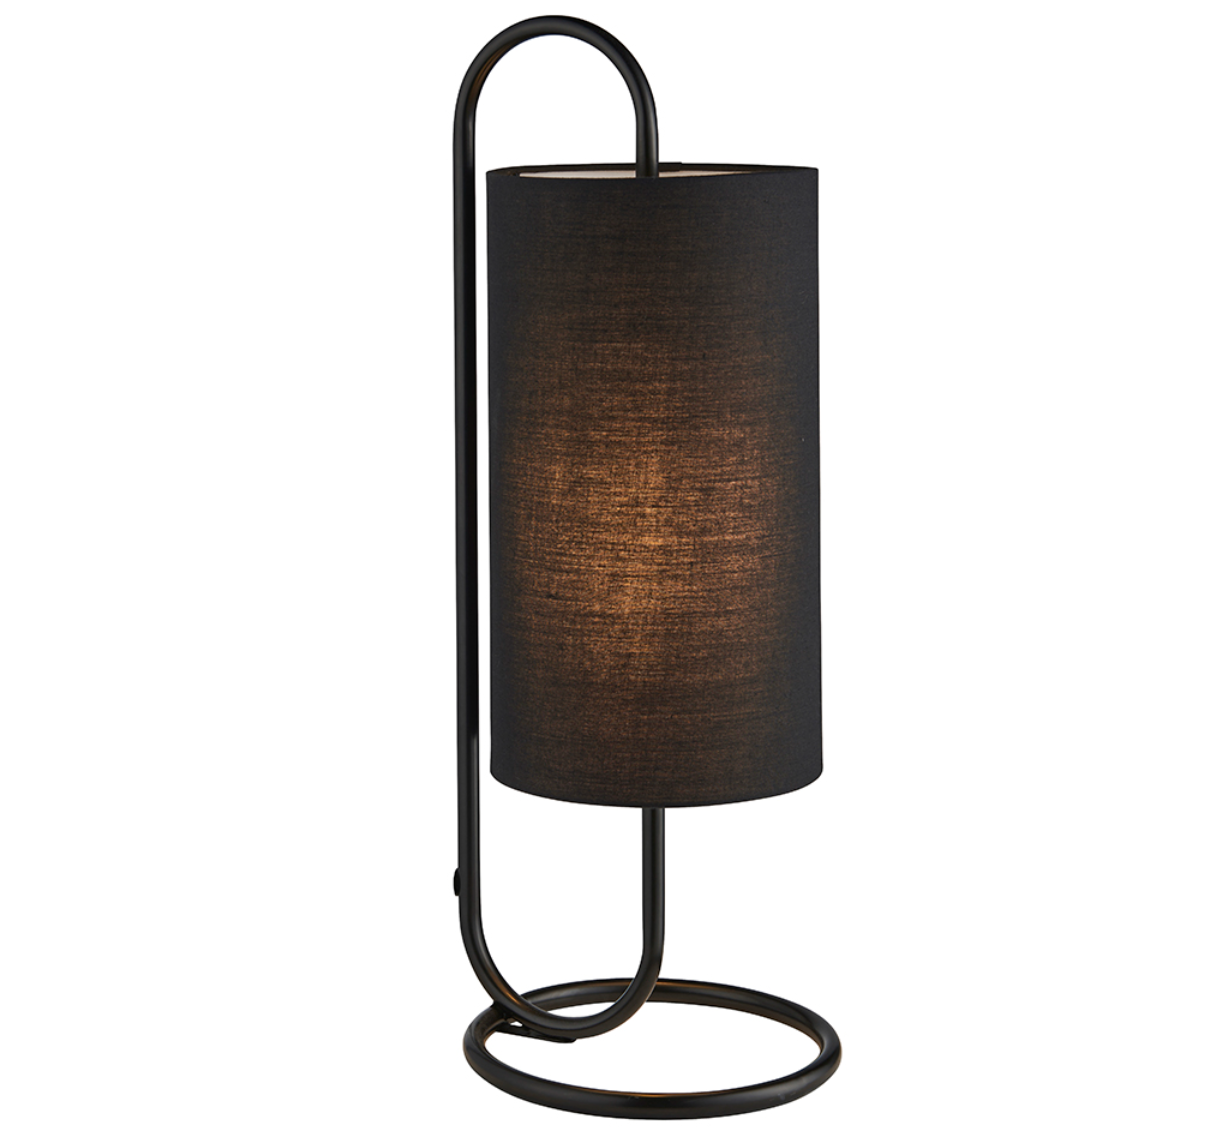 Oval structural matt black table light with black fabric shade - ID 11399